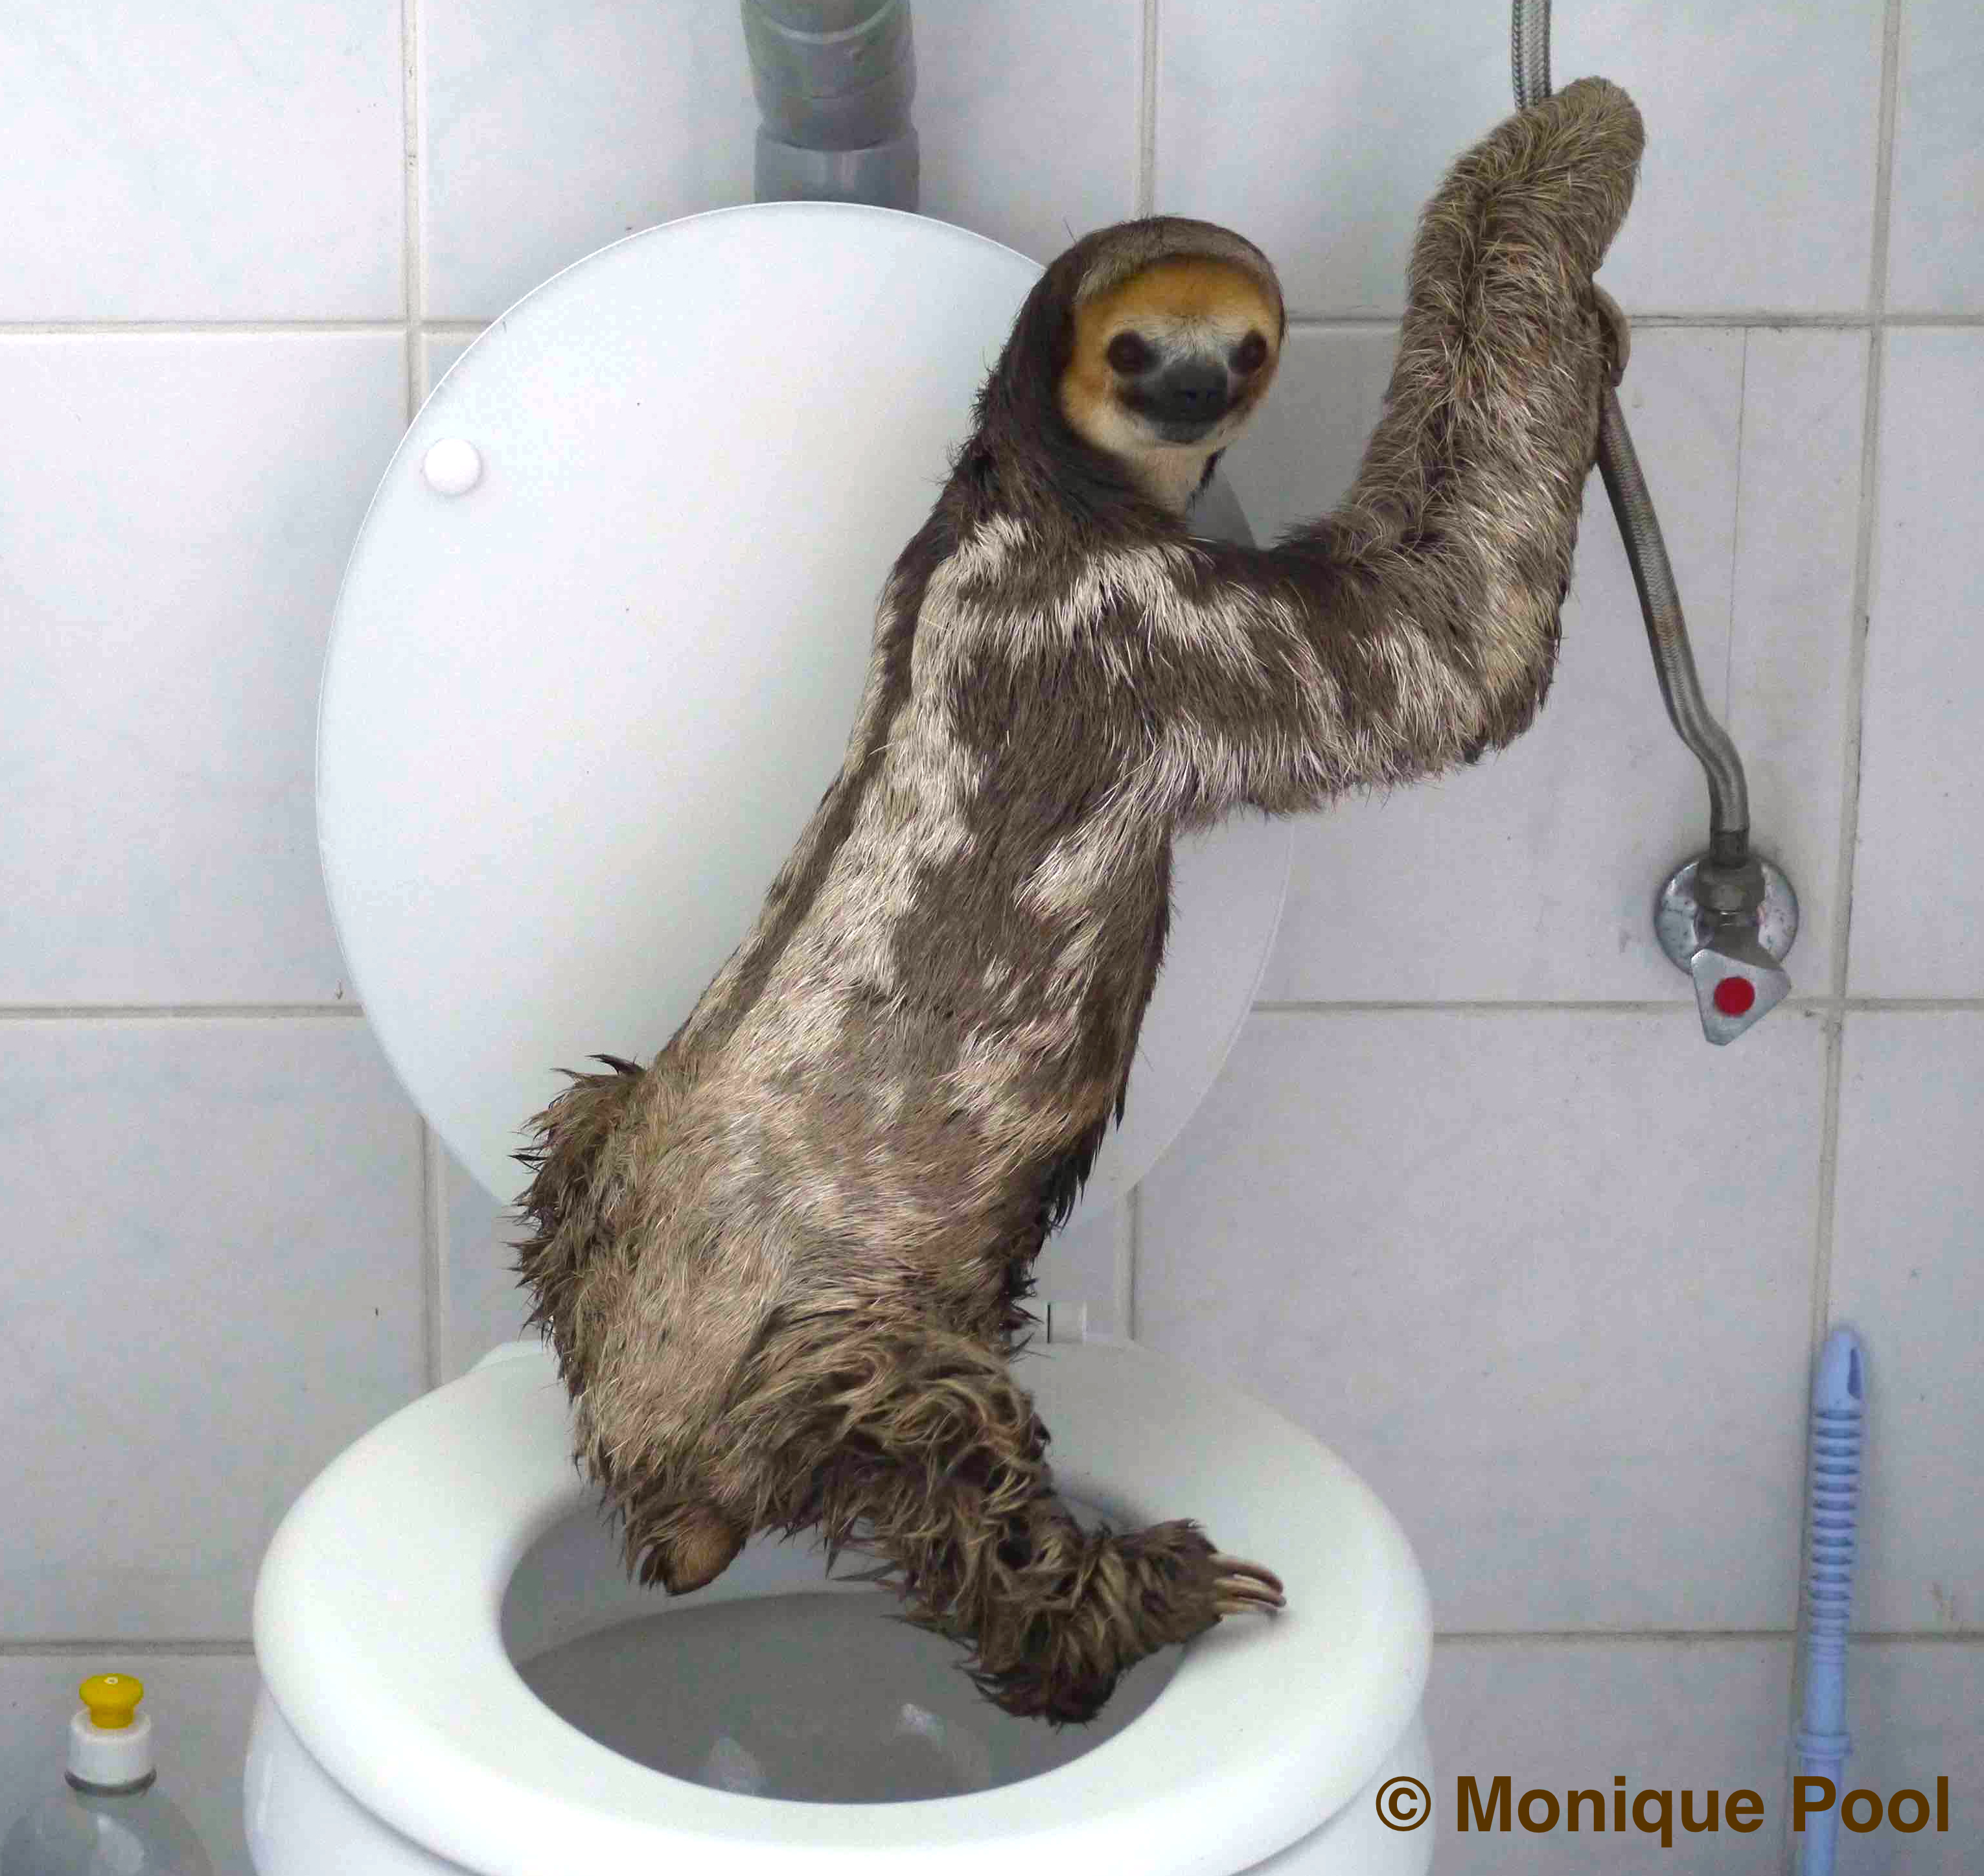 Extraordinatory Photos and Story of Potty-Trained Sloth.